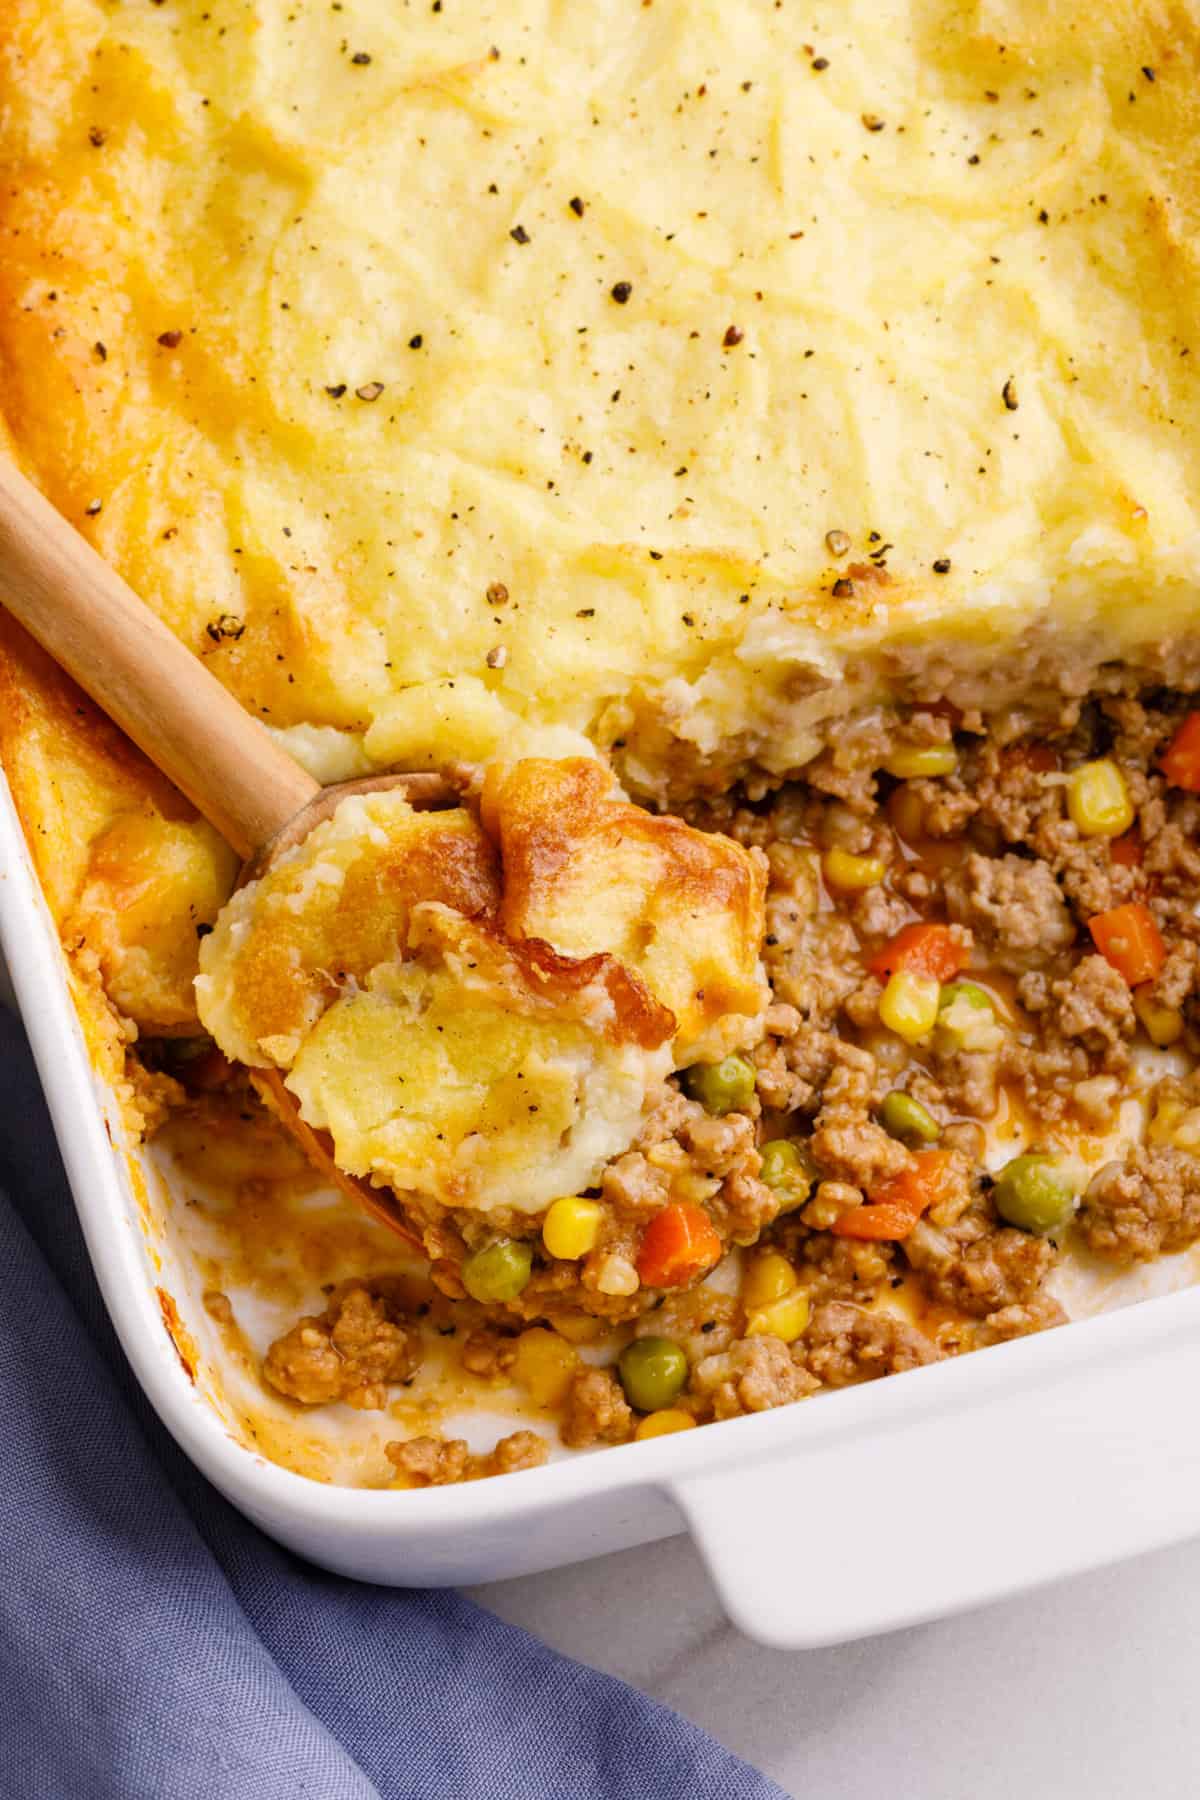 Close up image of shepherd's pie served in a casserole dish with a wooden spoonful of the pie.